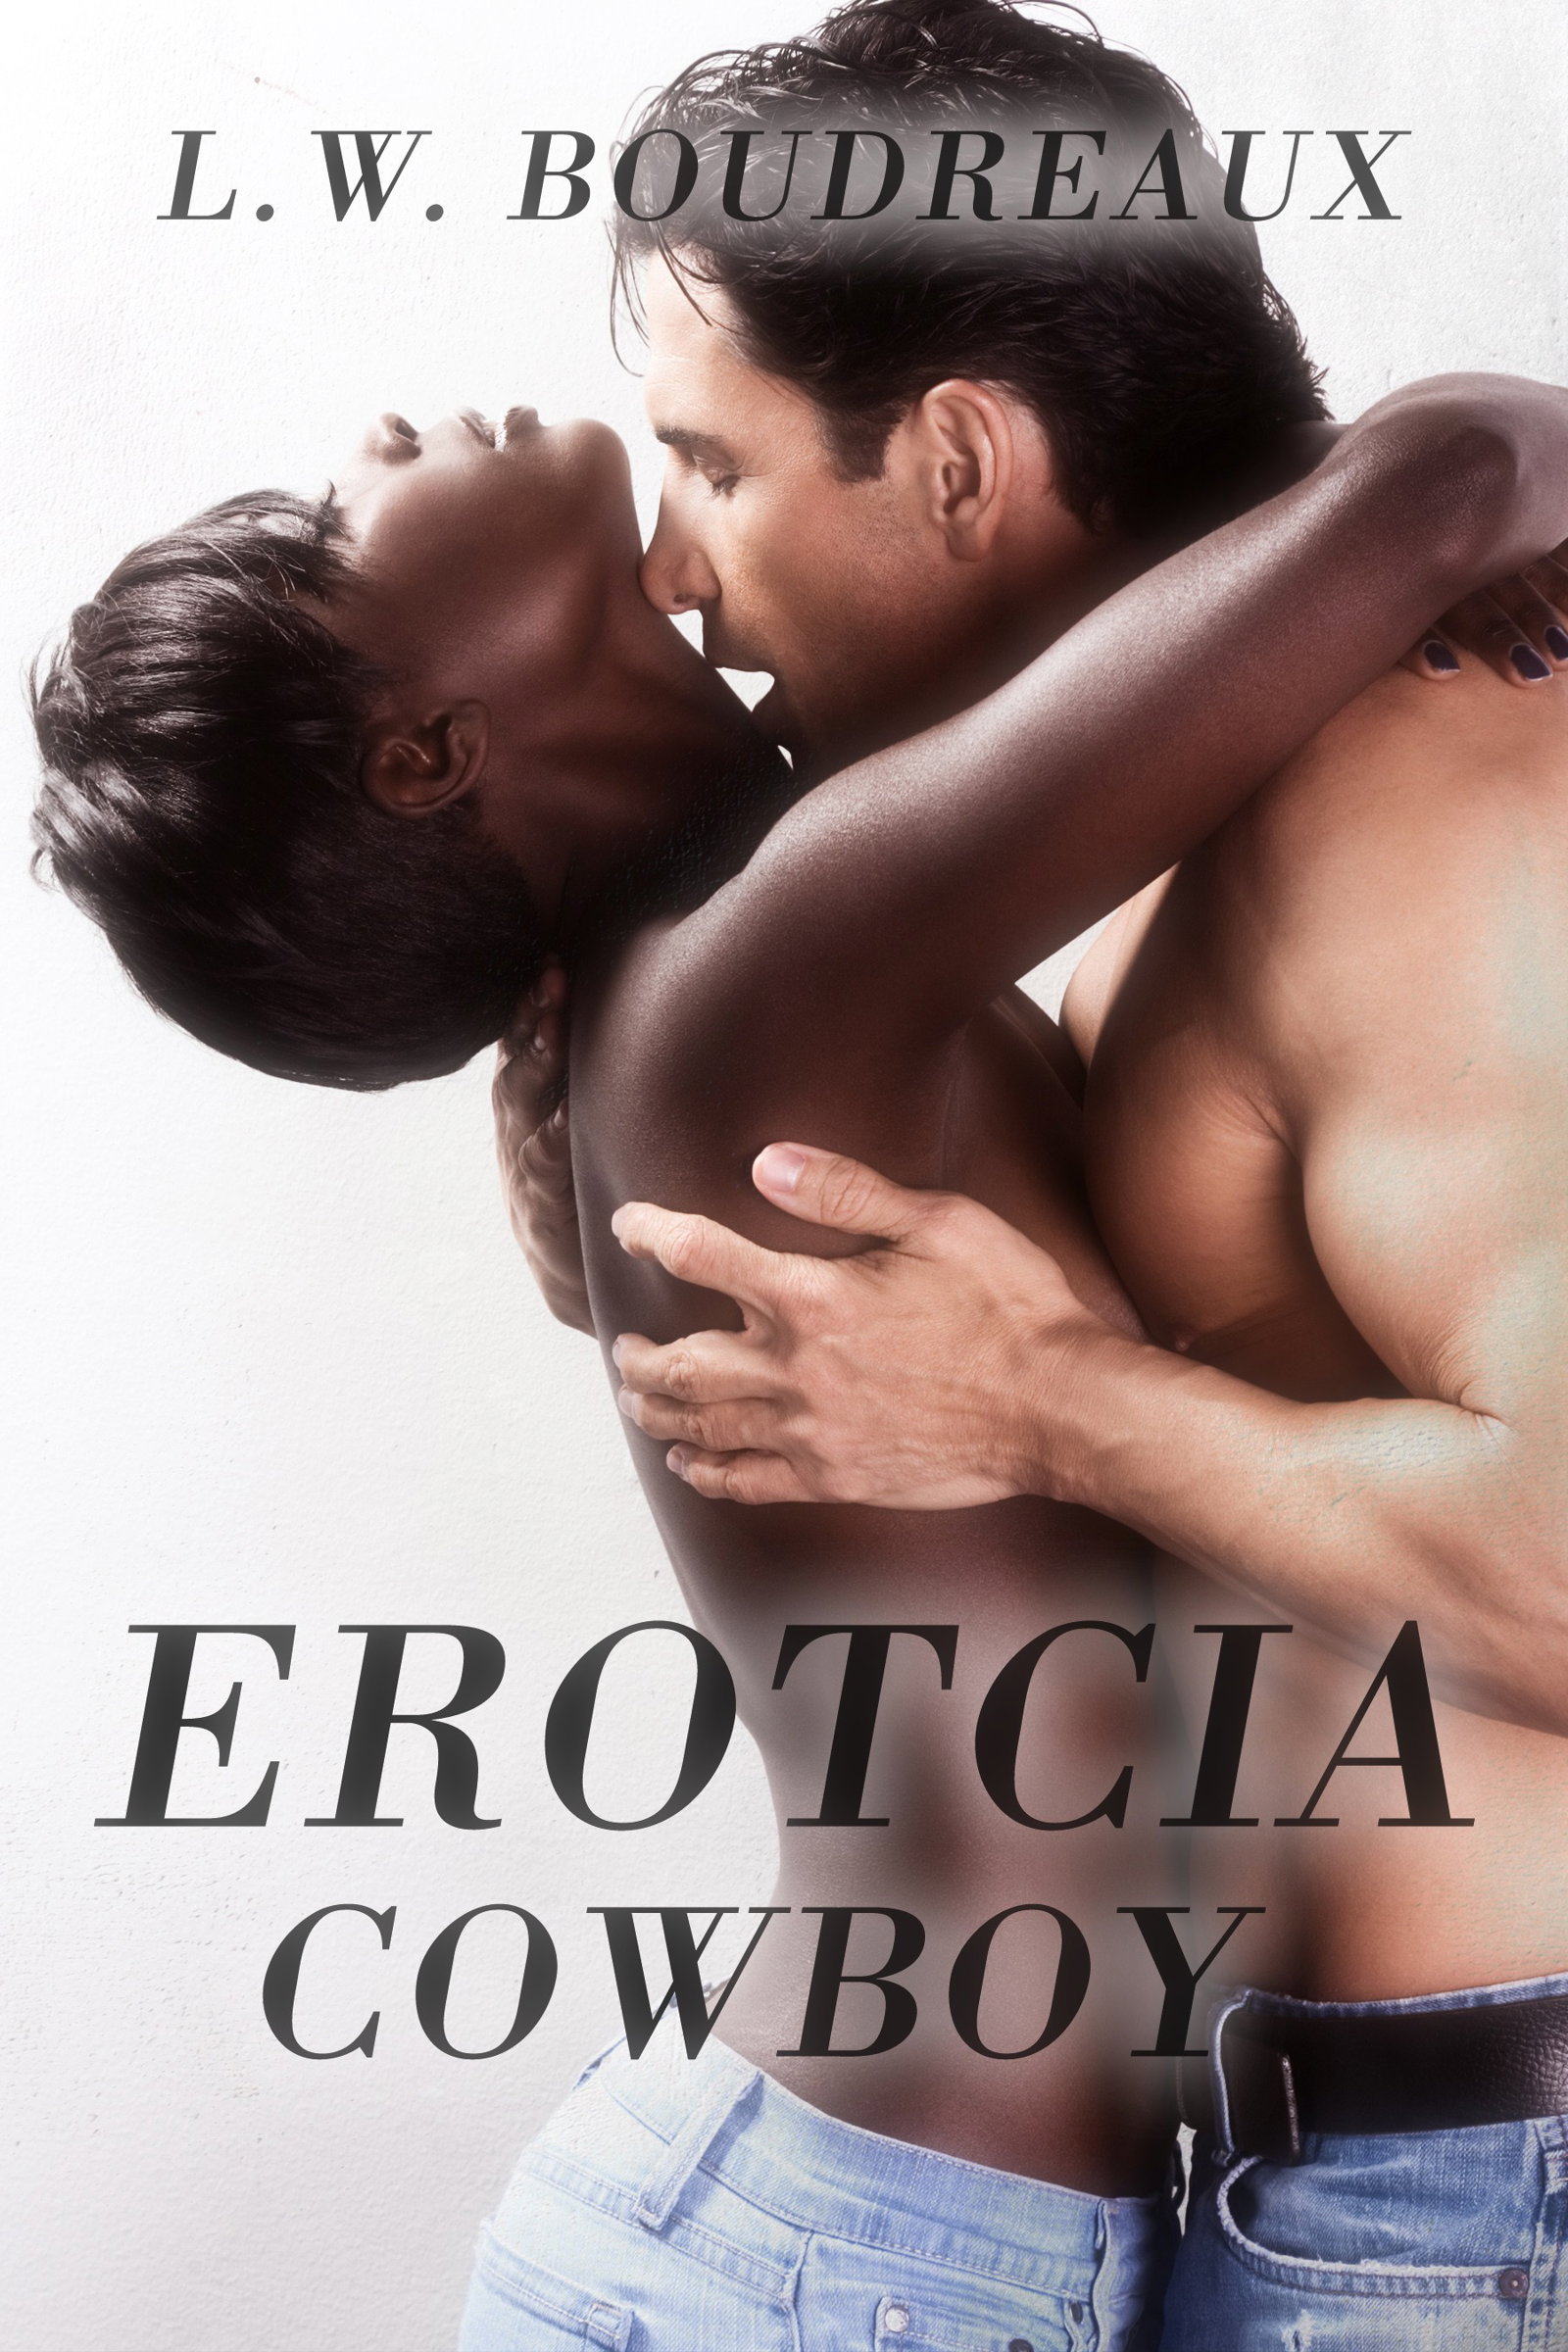 Photo by erotcia with the username @erotcia, who is a verified user,  May 28, 2020 at 9:29 AM. The post is about the topic Erotcia: Erotica books by LW Boudreaux and the text says 'SHARE IF YOU'D RIDE THAT!!!

I sure as hell would.

Ride this cowboy or girl today on Amazon 

https://amzn.to/3eoYBh5

or find out more at https://www.erotcia.com

#erotica #books #cowboyerotica #sexyreads #sexbooks #eroticawriting #interracial'